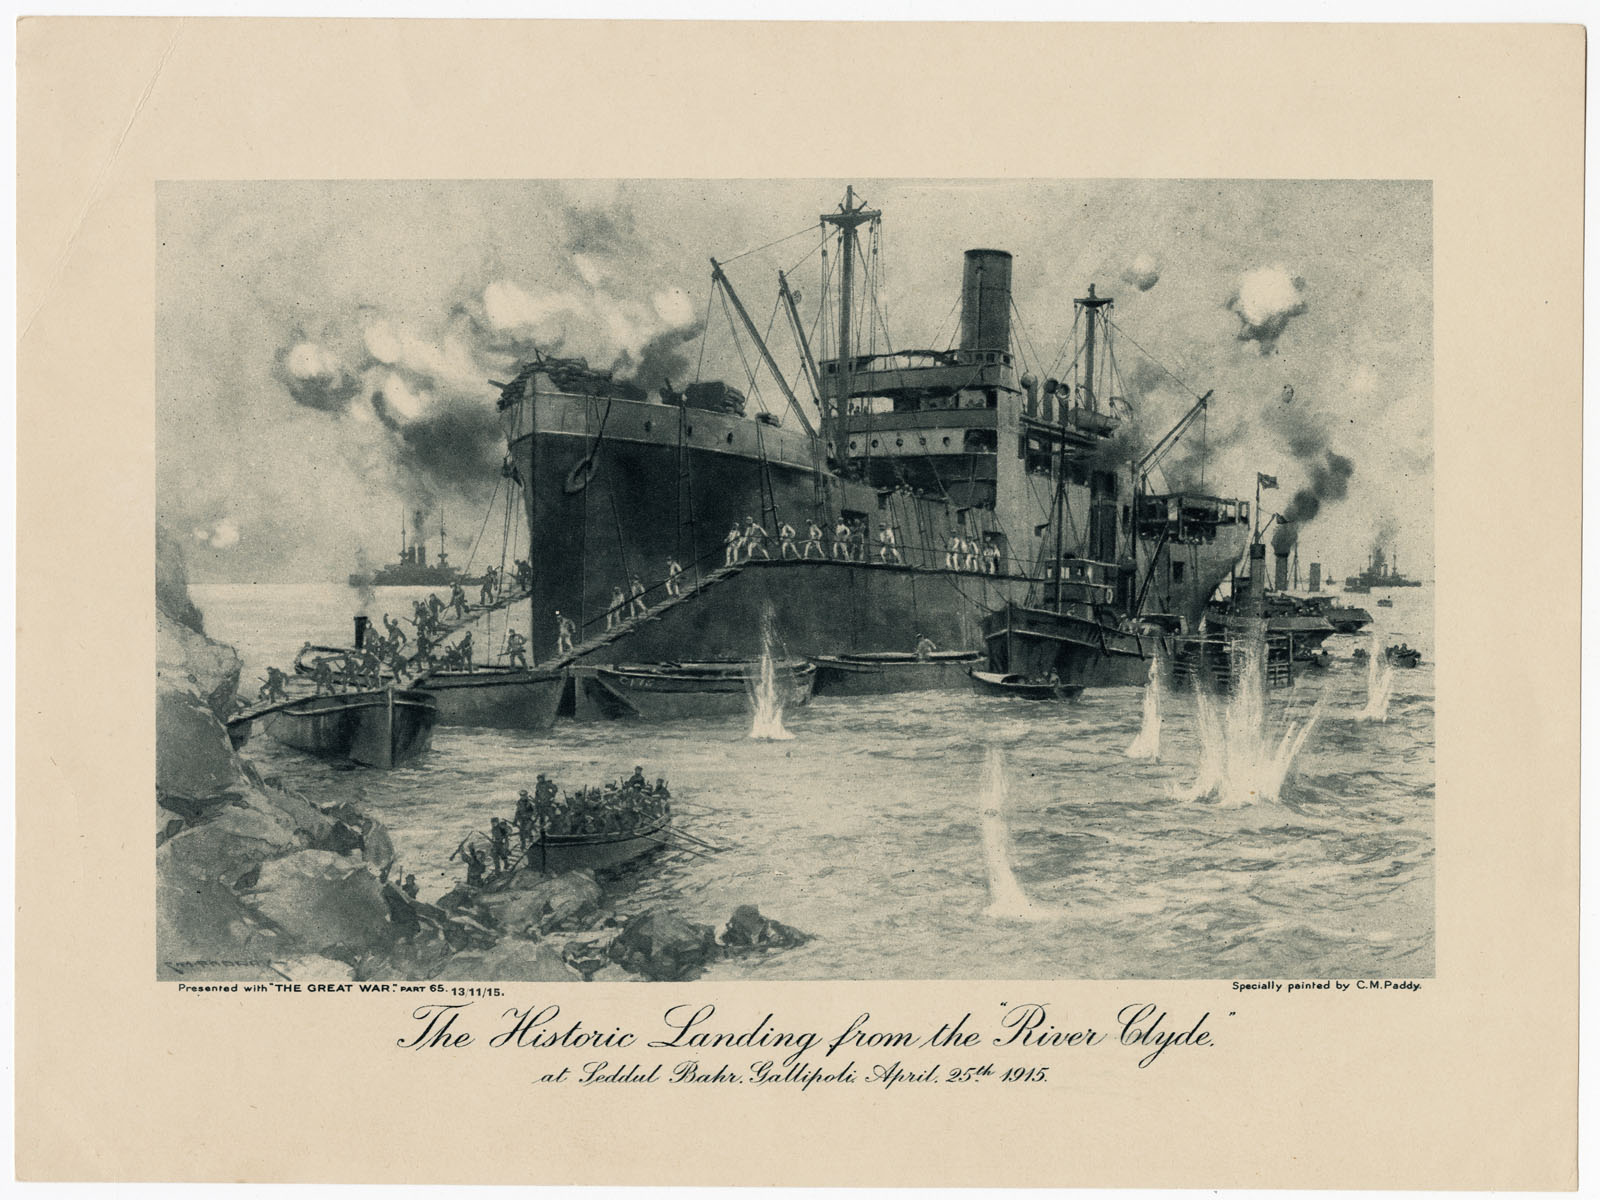 Black and white print of a steamship landed near a coast. Sailors are running off the ship to land while shells fall in the water around them.